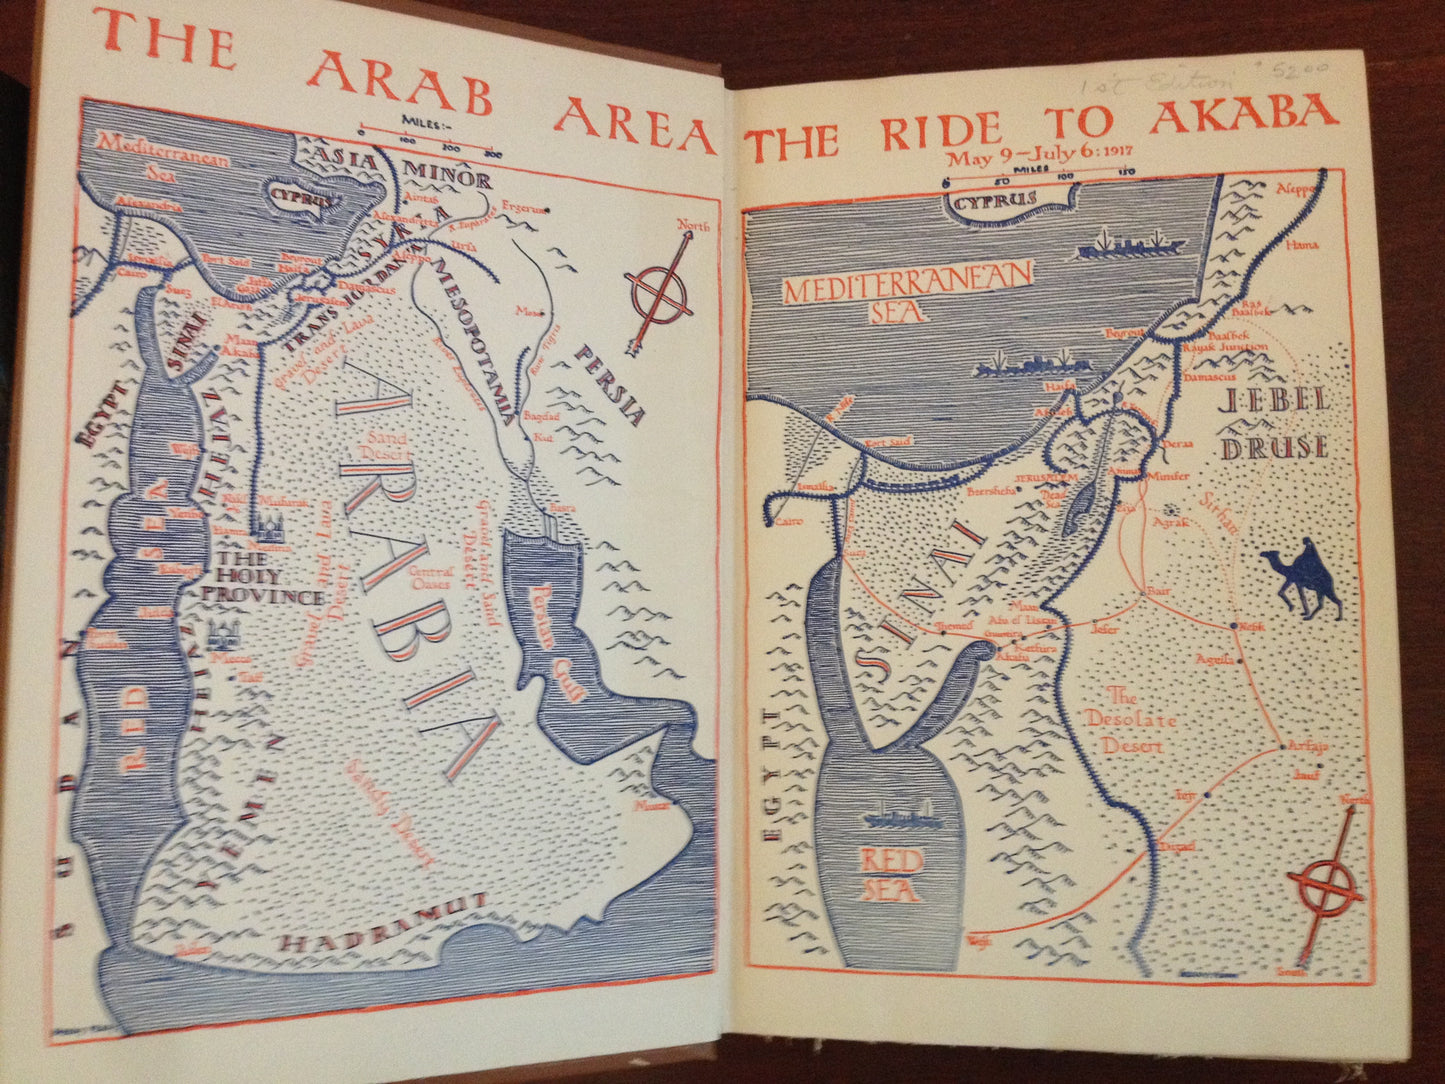 LAWRENCE AND THE ARABIAN ADVENTURE  - ROBERT GRAVES